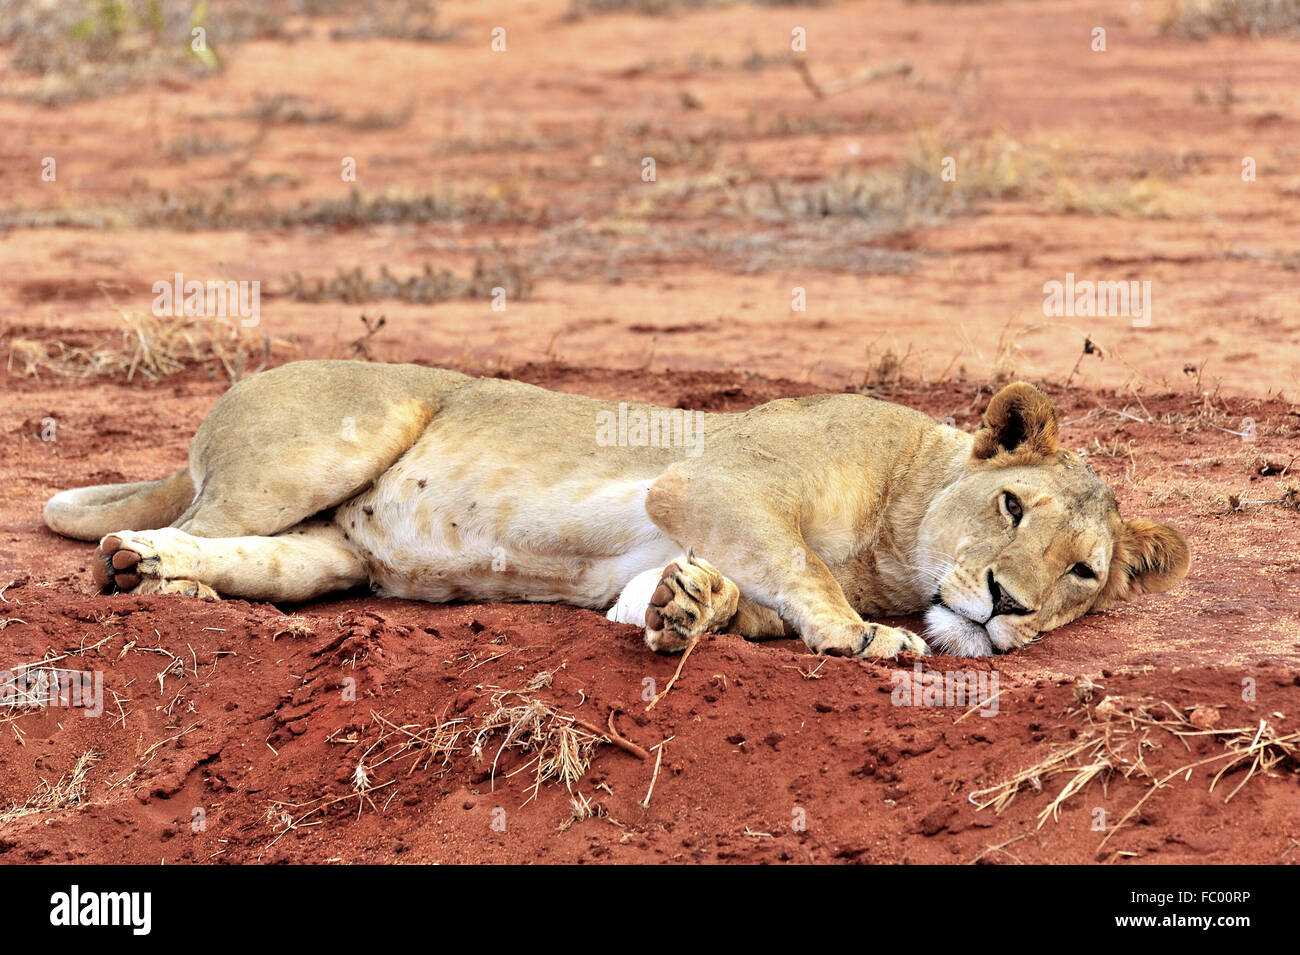 Lion Laying down on earth Stock Photo